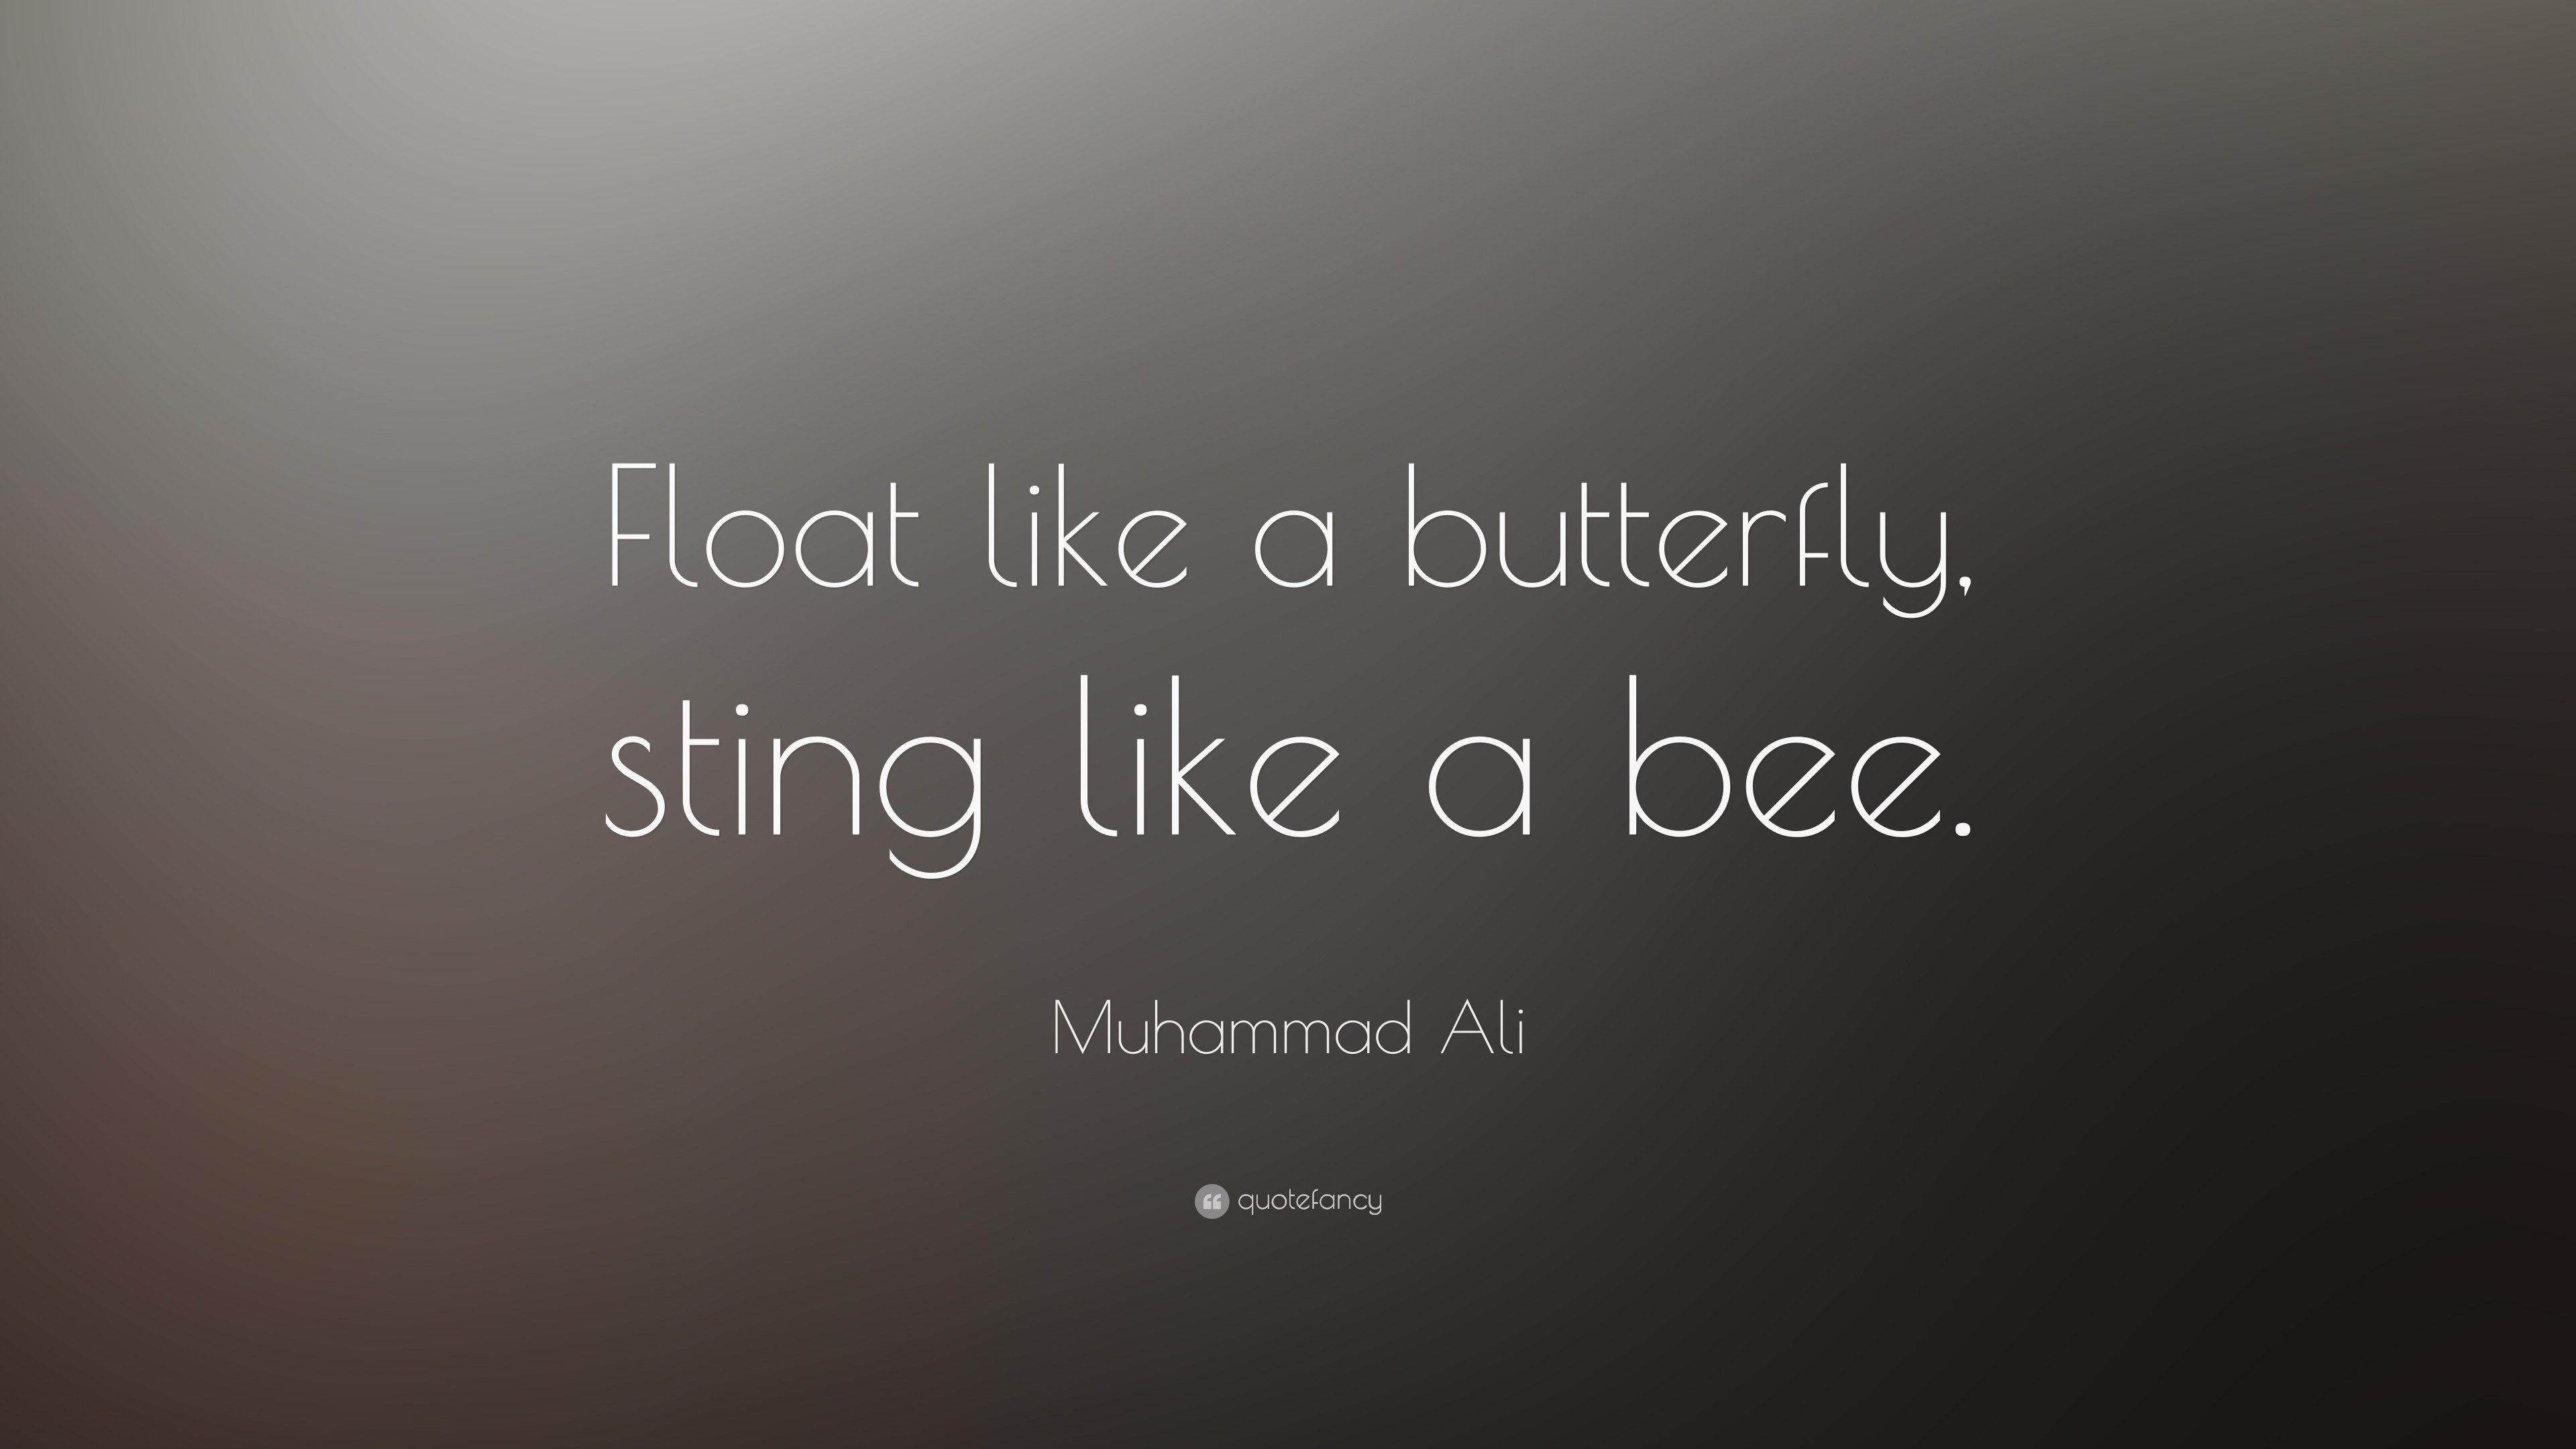 3840x2160 Muhammad Ali Quote: “Float like a butterfly, sting like a bee.”